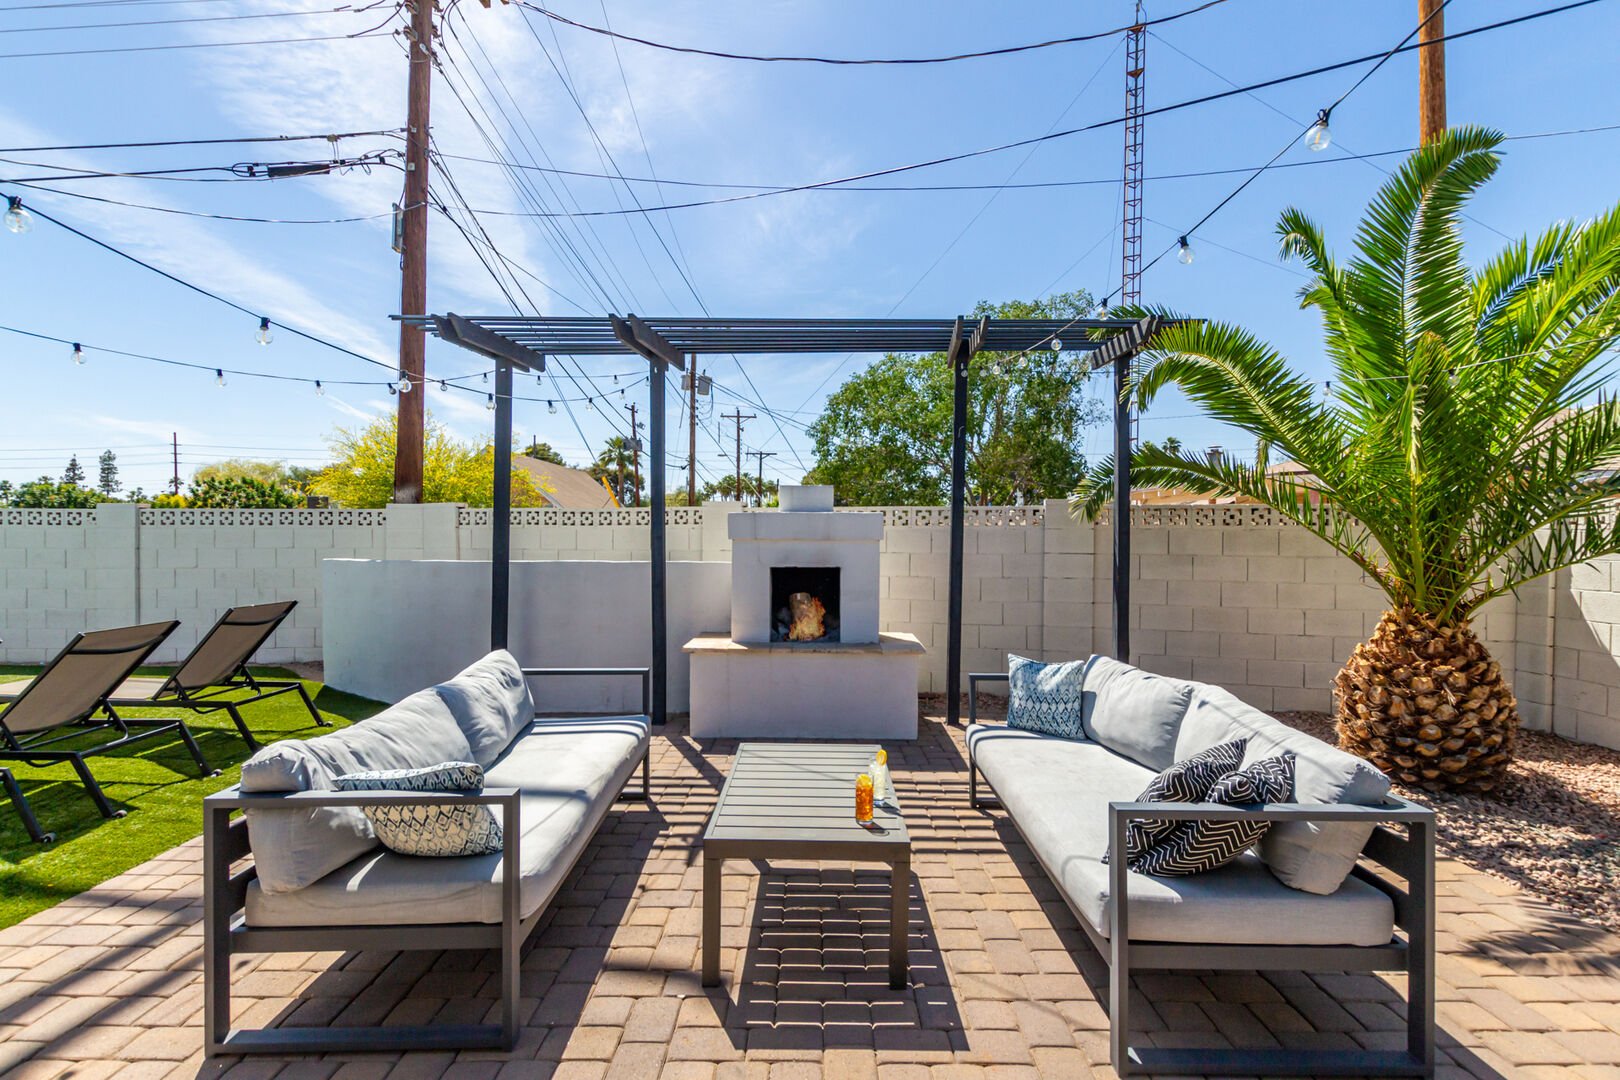 Private Backyard featuring a new mural, sparkling blue pool, fire pit, yard games and a covered patio with outdoor dining and lounging.